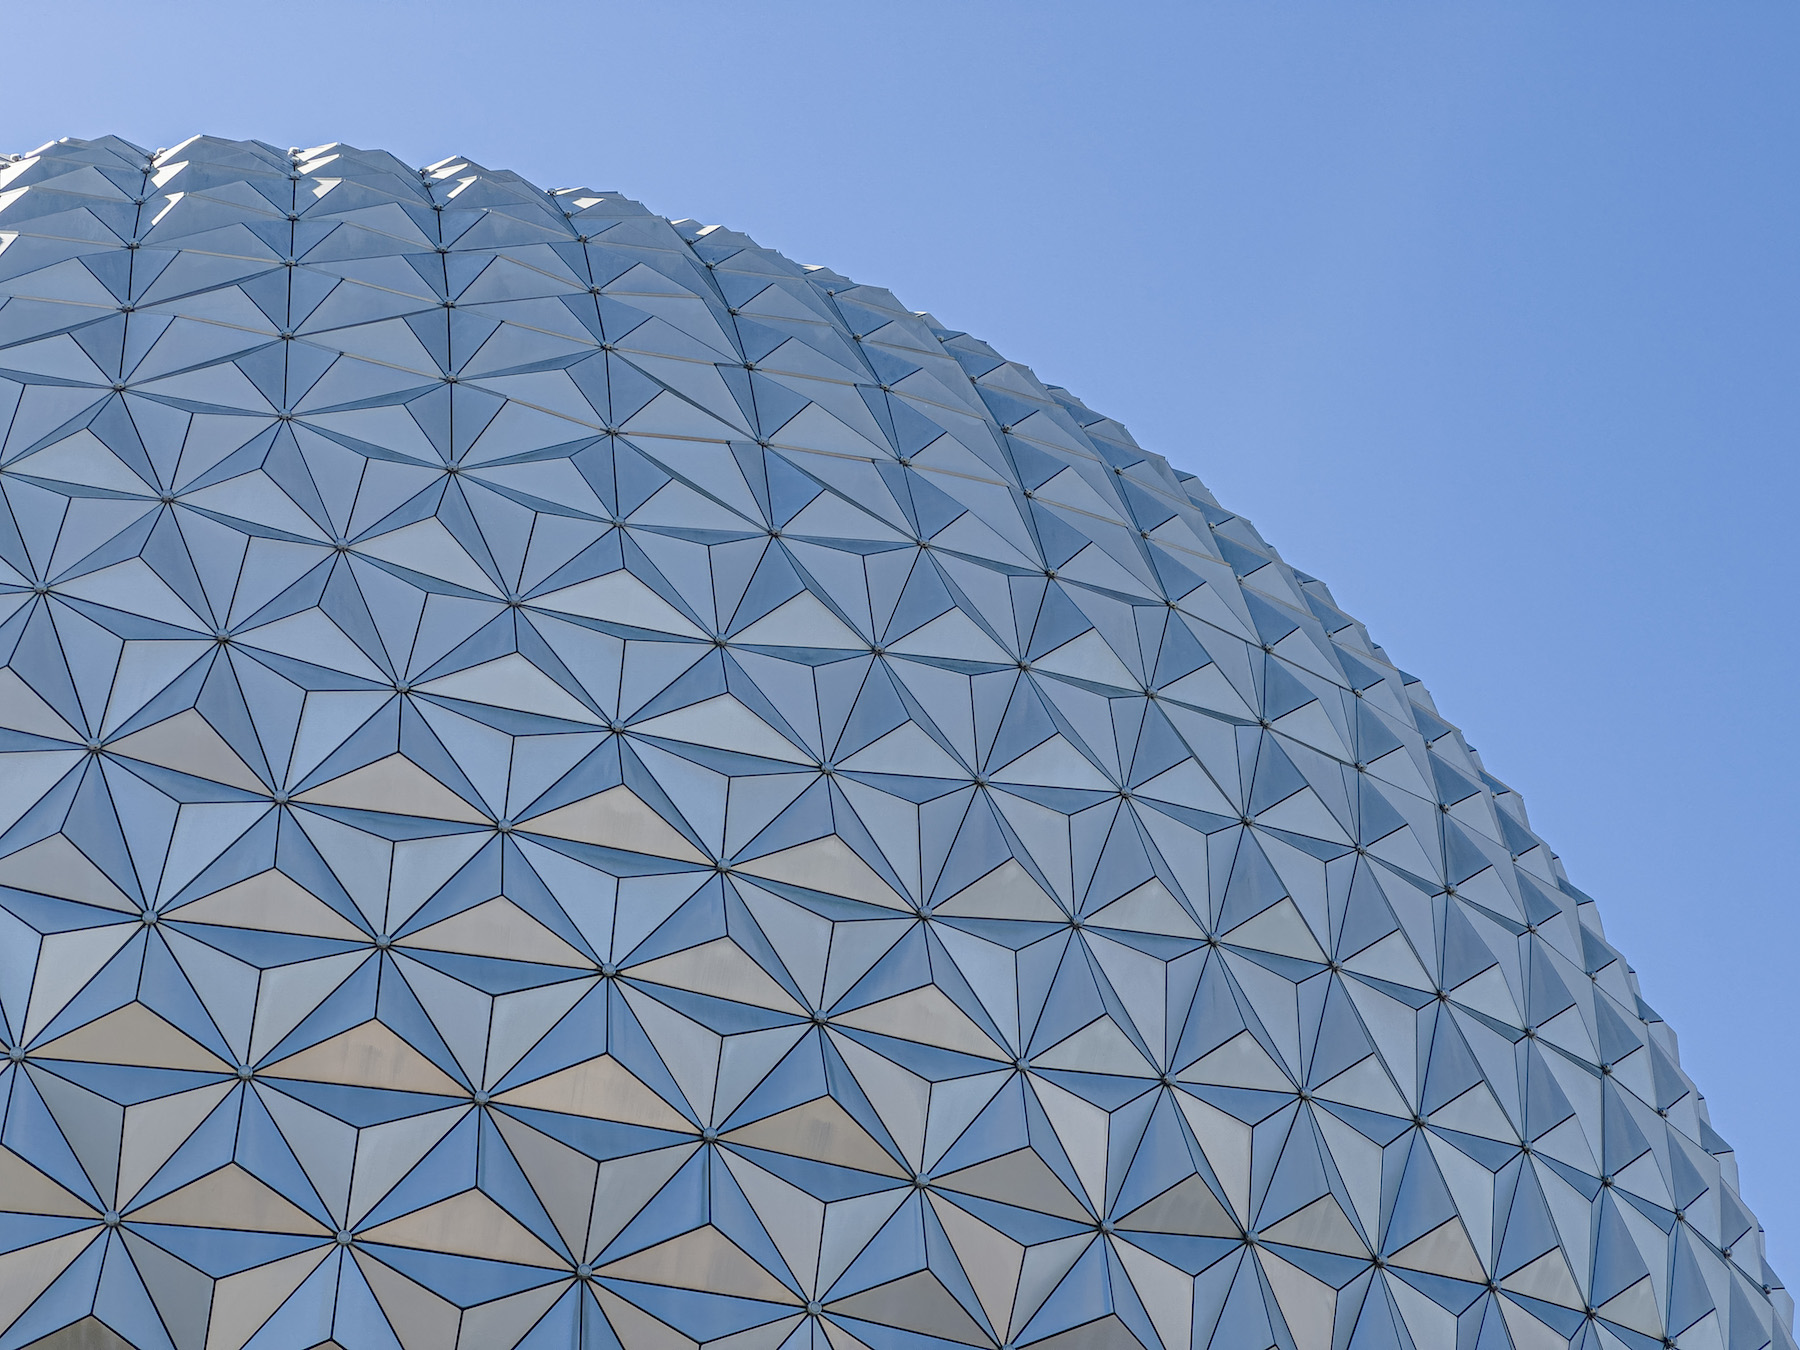 A abstract photo of Epcot's Spaceship Earth